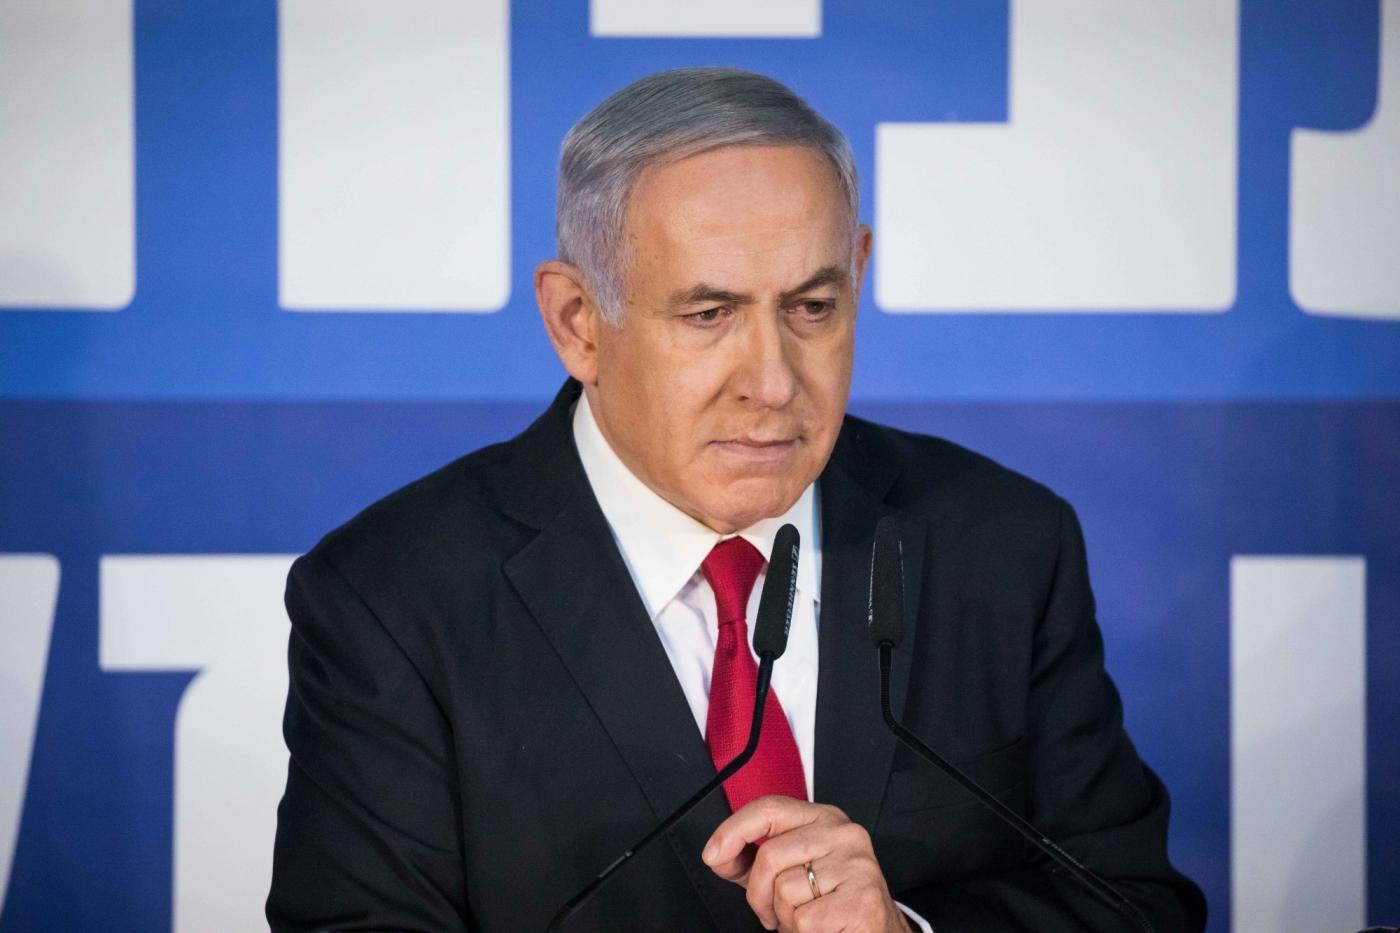 JERUSALEM, Feb. 28, 2019 (Xinhua) -- Israeli Prime Minister Benjamin Netanyahu speaks to reporters in his Jerusalem office, on Feb. 28, 2019. Israeli Prime Minister Benjamin Netanyahu on Thursday blasted the decision by the attorney general to charge him with corruption as a left-wing "conspiracy." (Xinhua/JINI/IANS) by . 